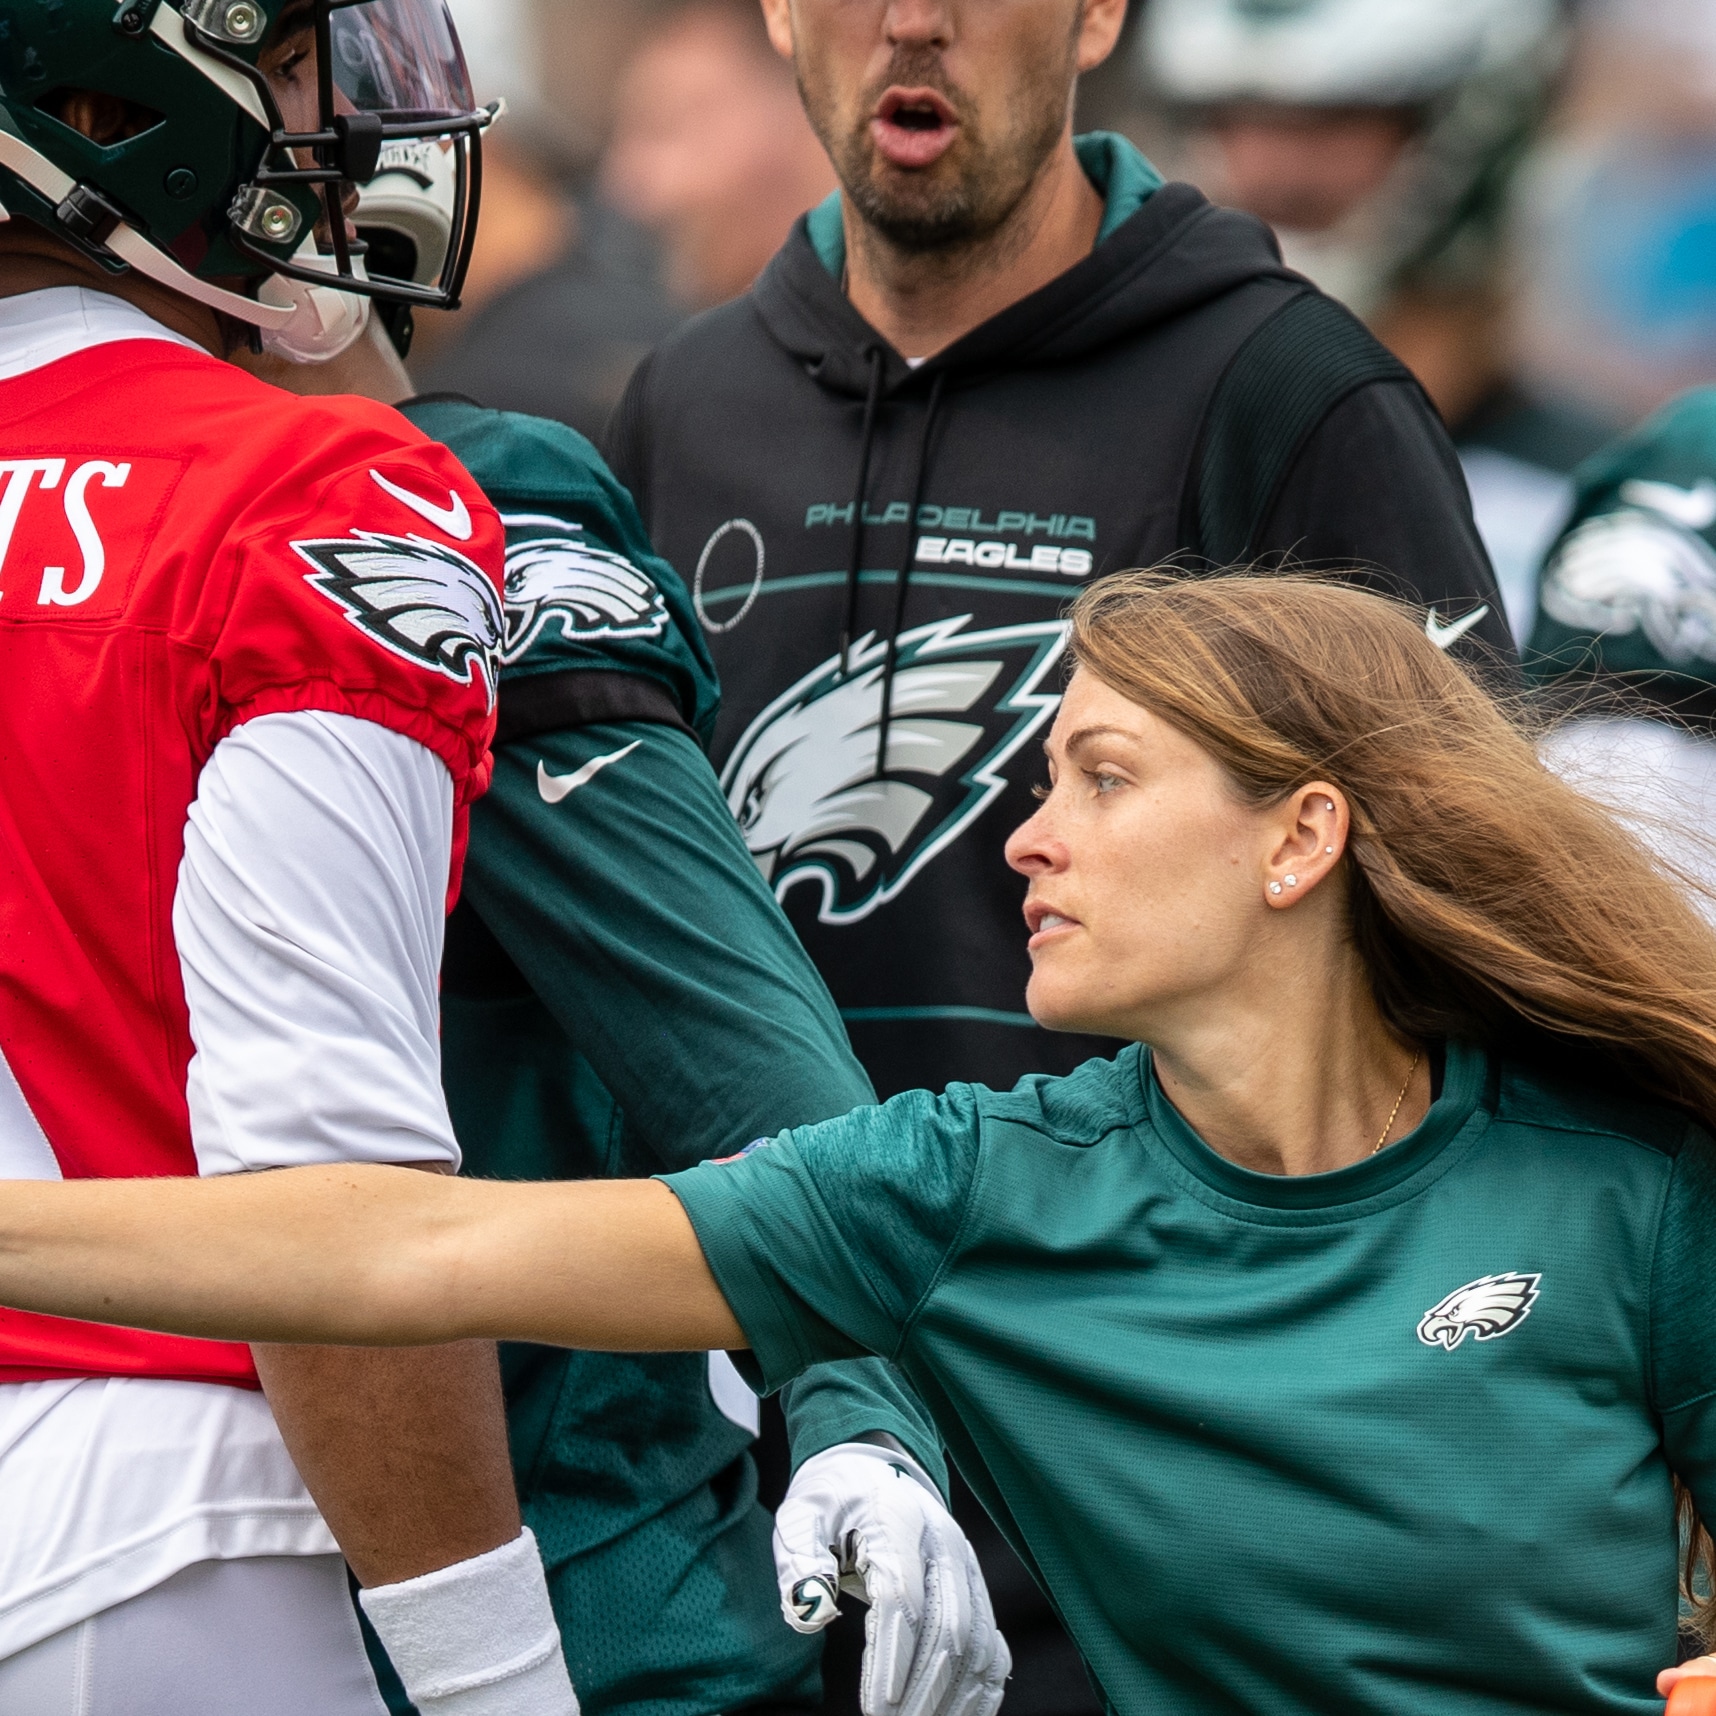 Philadelphia Eagles Sports Dietitian Shares the Importance of Nutrition for the Team